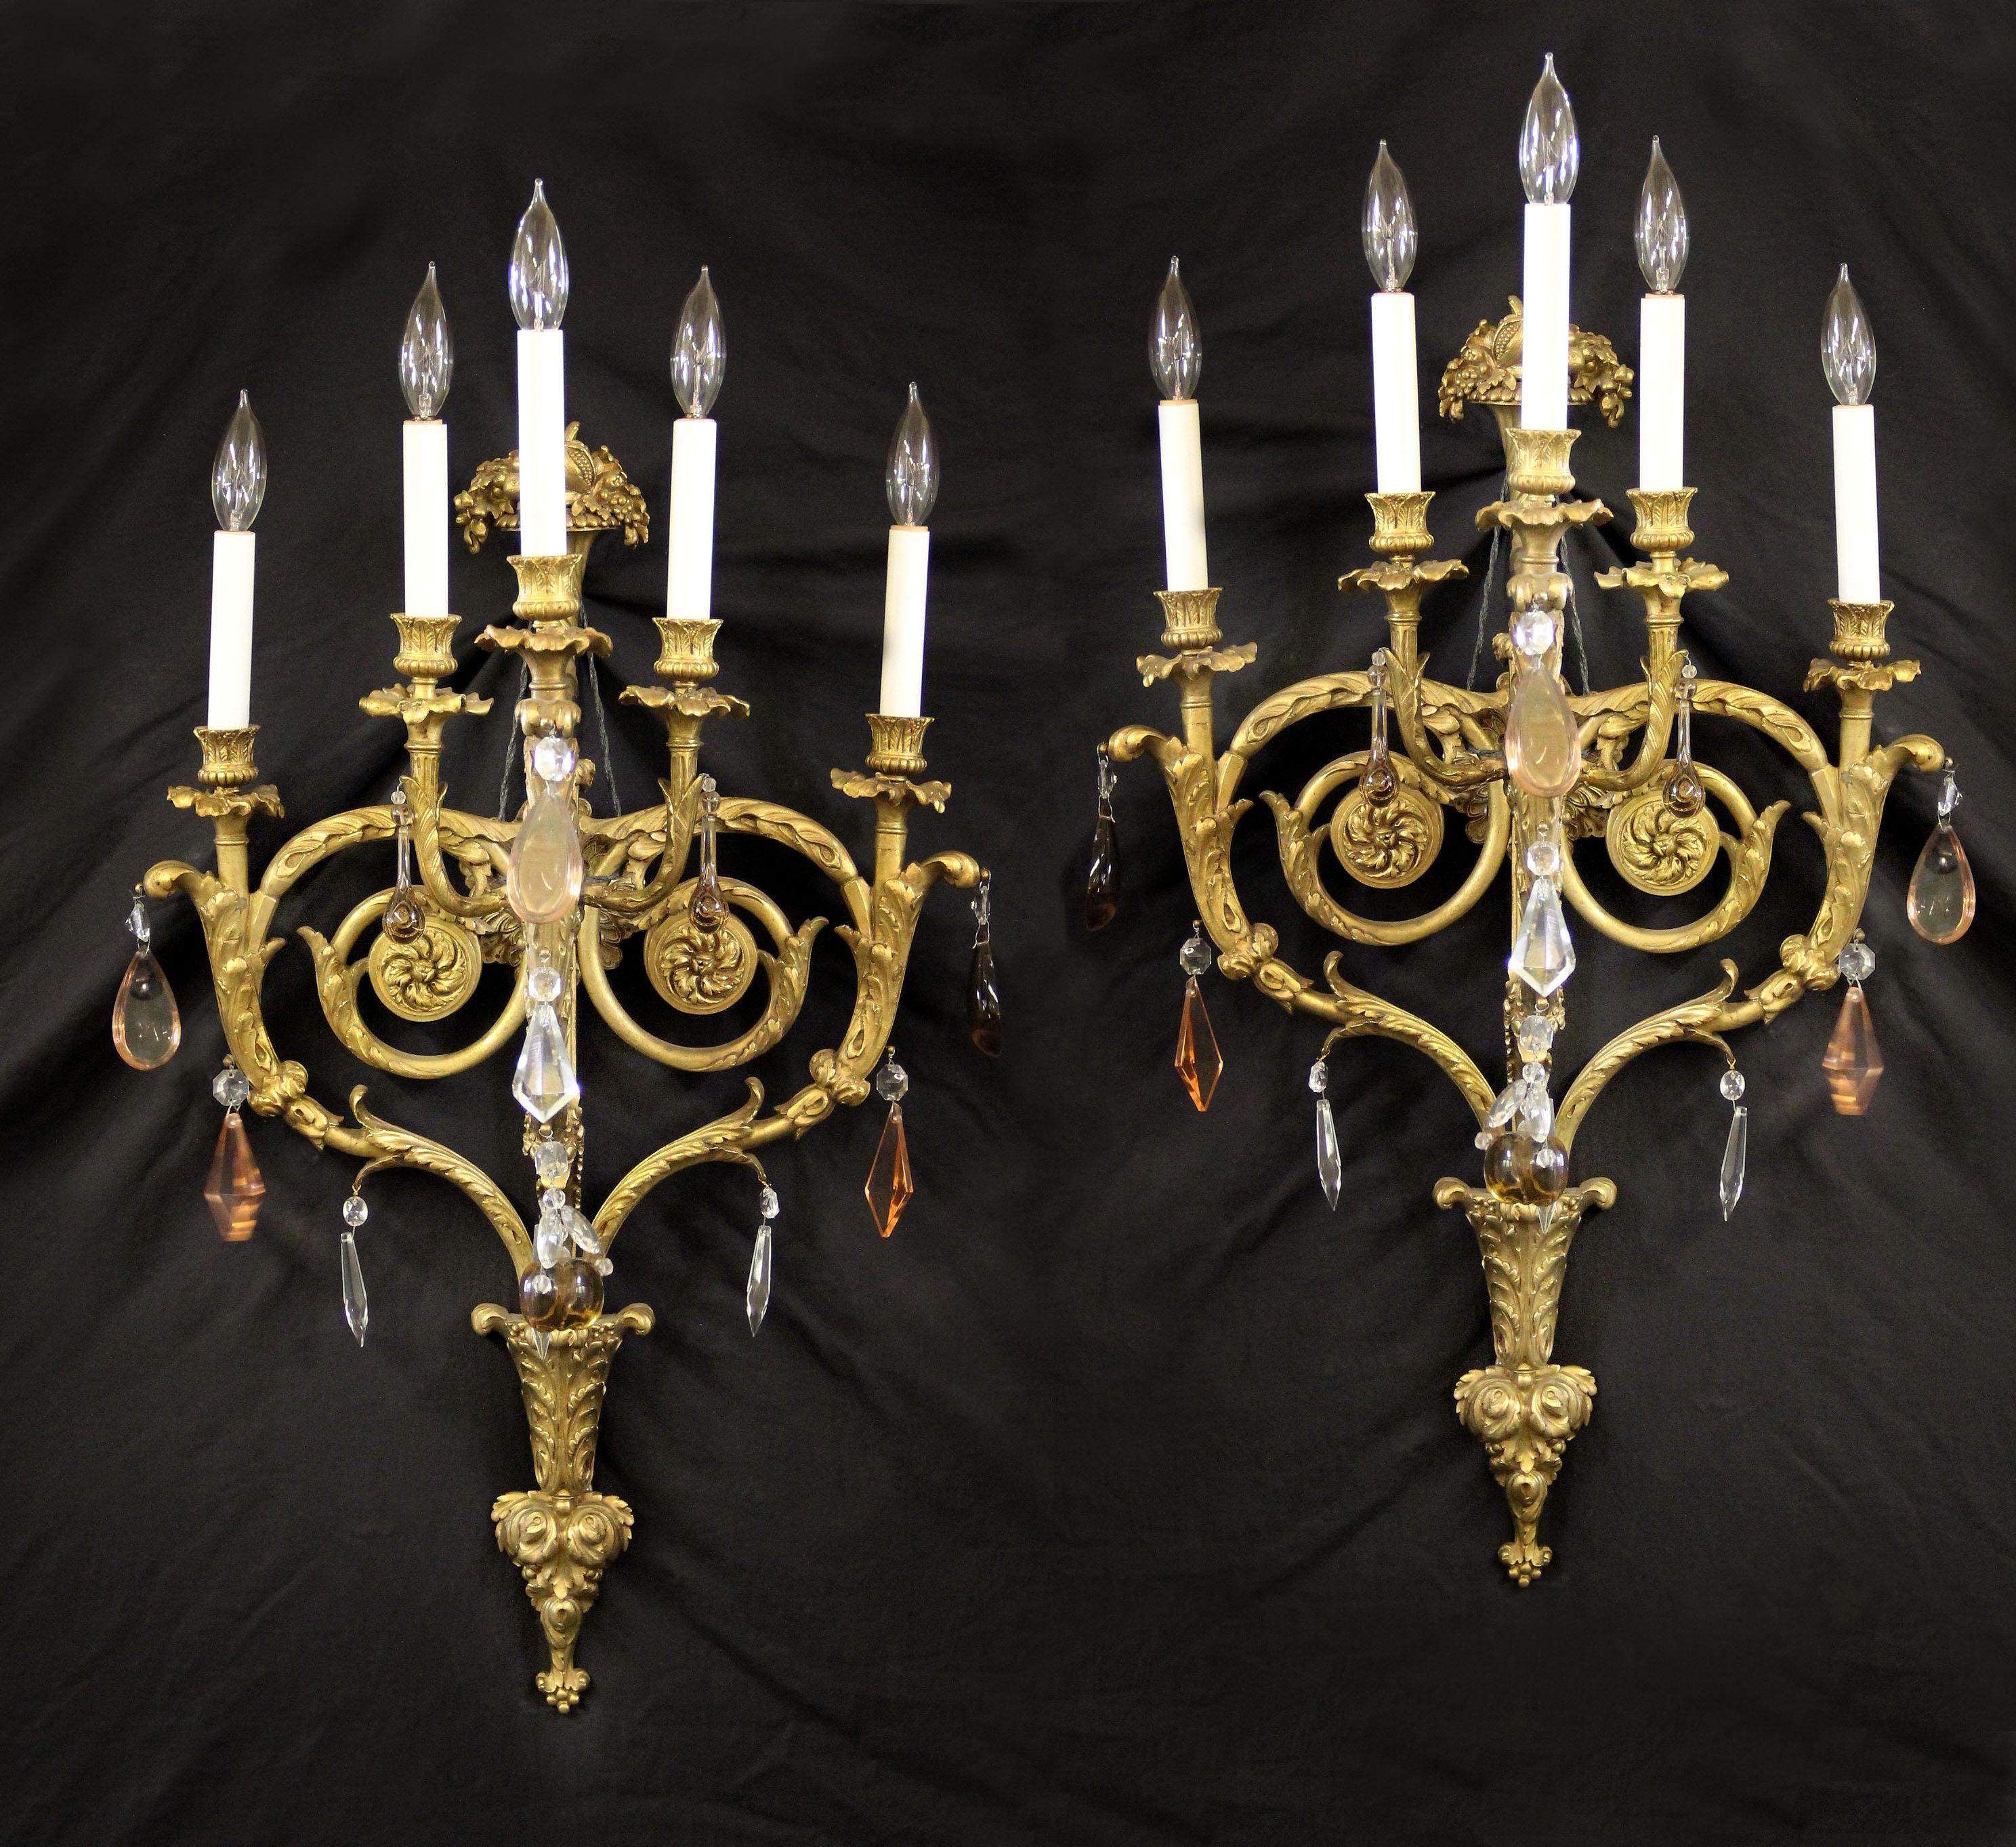 A fine quality pair of late 19th century gilt bronze and French crystal five-light sconces.

Multifaceted and shaped crystal, foliate-scrolled arms and backplate, cantered by a cornucopia with produce and flowers, five-tiered lights.